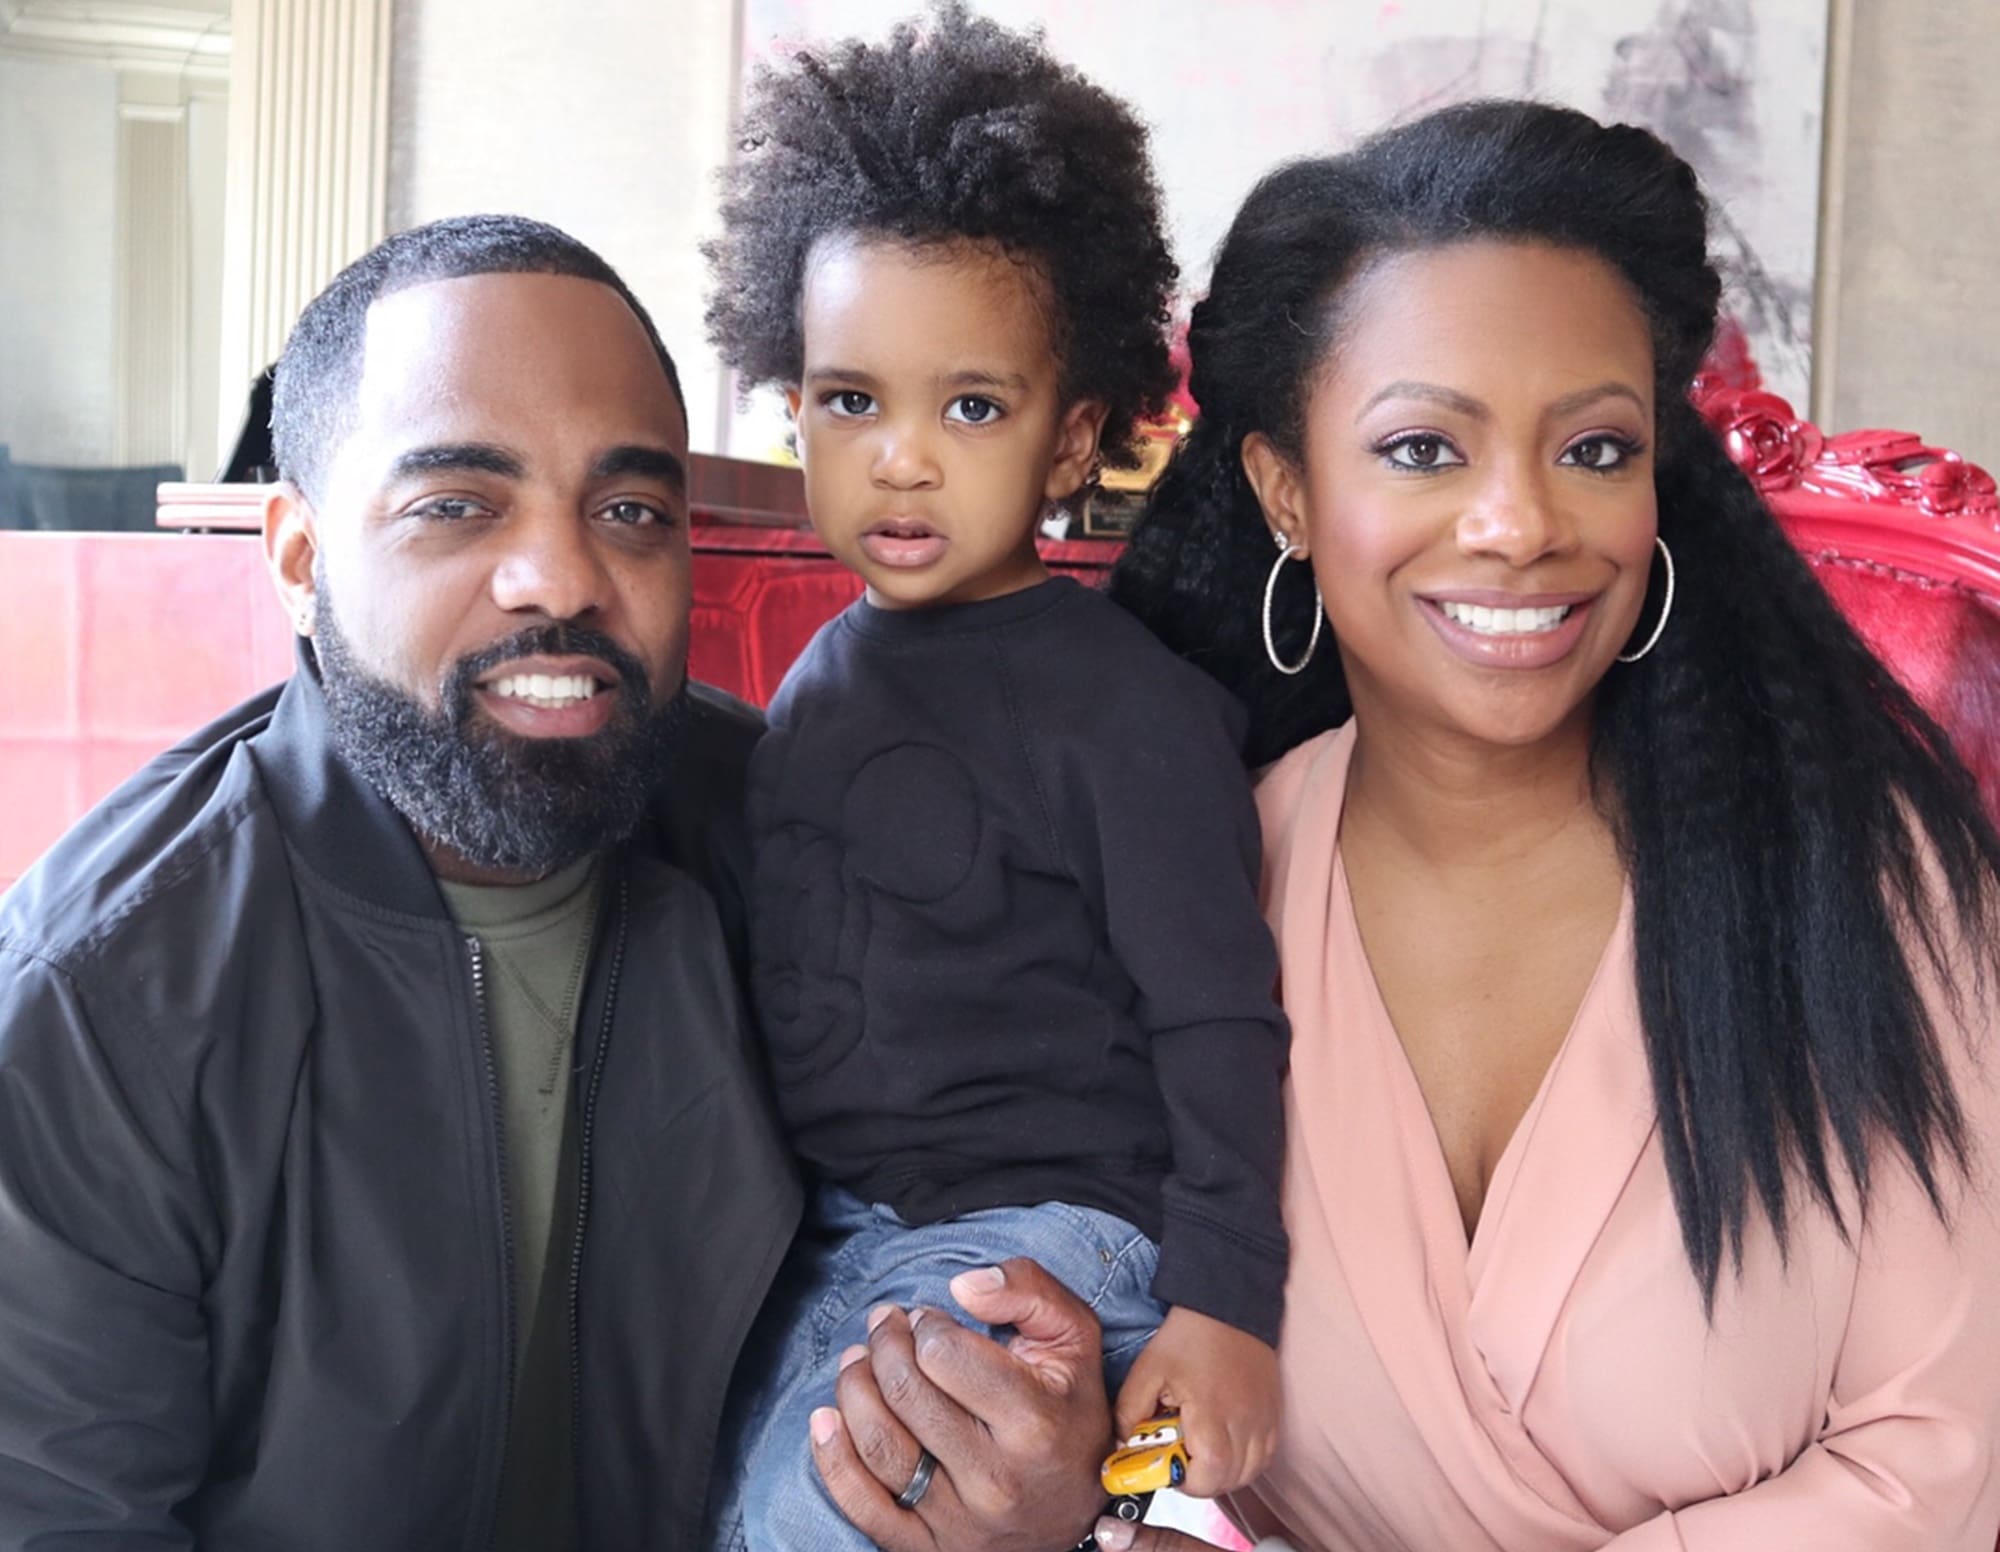 Kandi Burruss Shares New Pics From Todd Tucker's Birthday - See Their Son, Ace Wells Tucker, Rasheeda Frost And More Family Friends